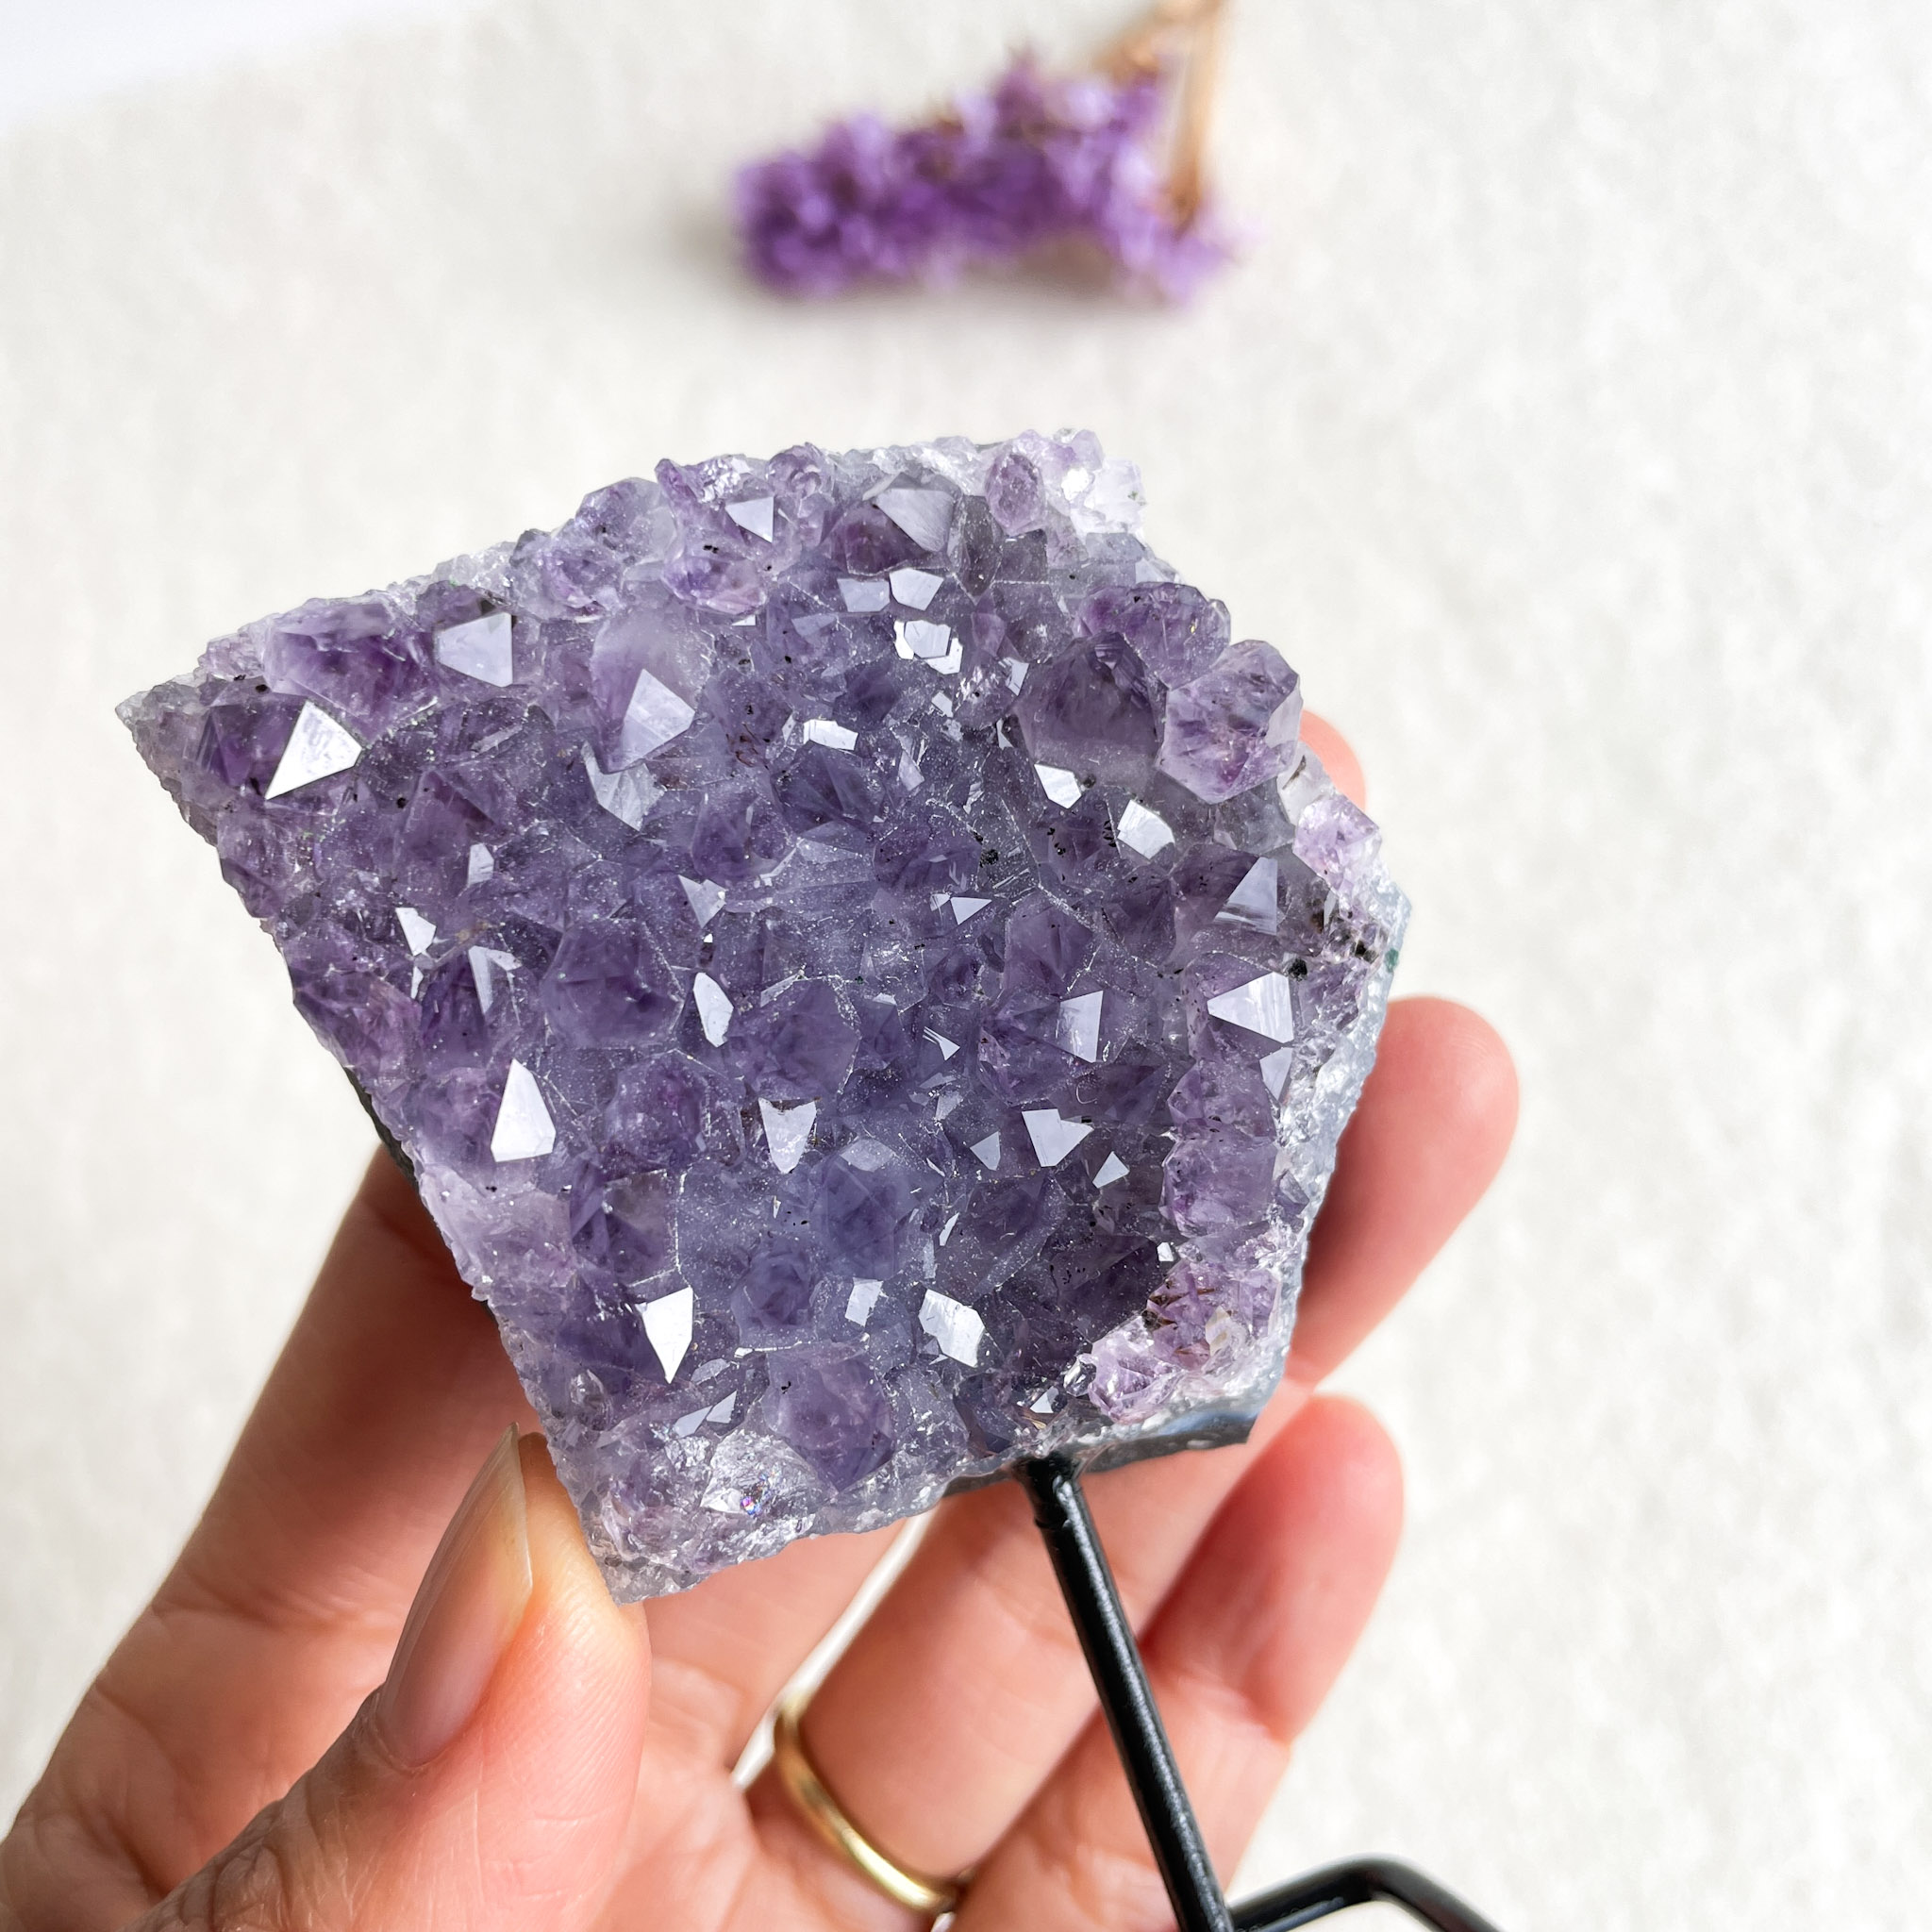 A person's hand holding a piece of purple amethyst crystal against a light background, with a blurred small purple flower in the distance.